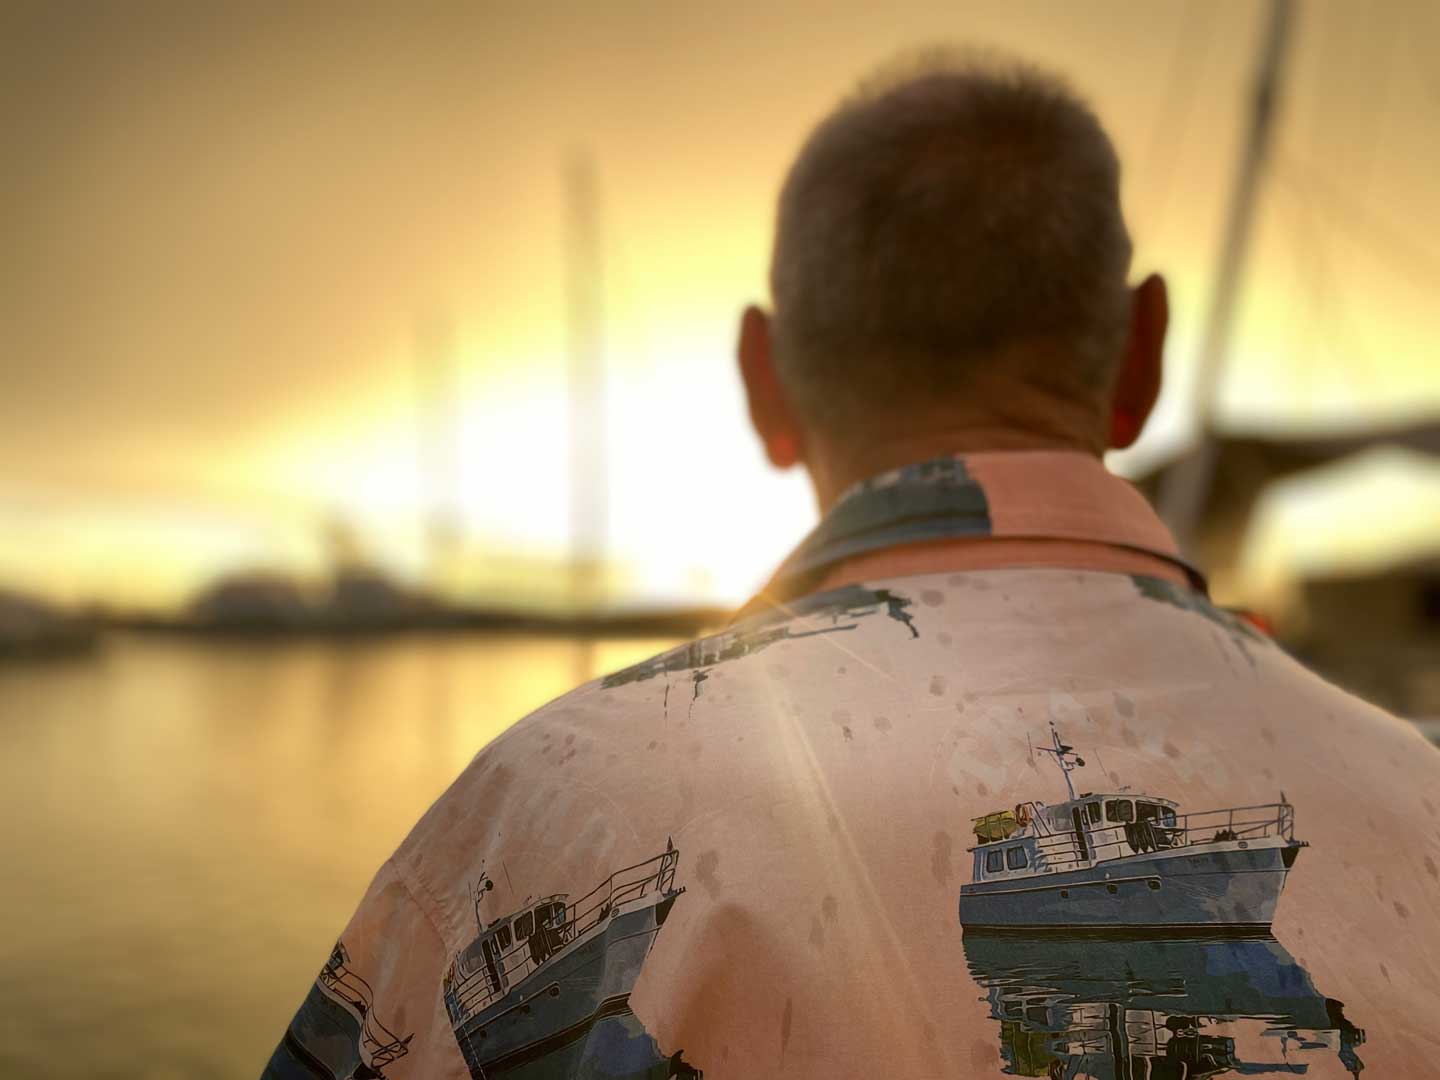 Captain Boatiful Watching the sunset in a rainshower in Borneo wearing a personalised hawaiian shirt featuring his boat